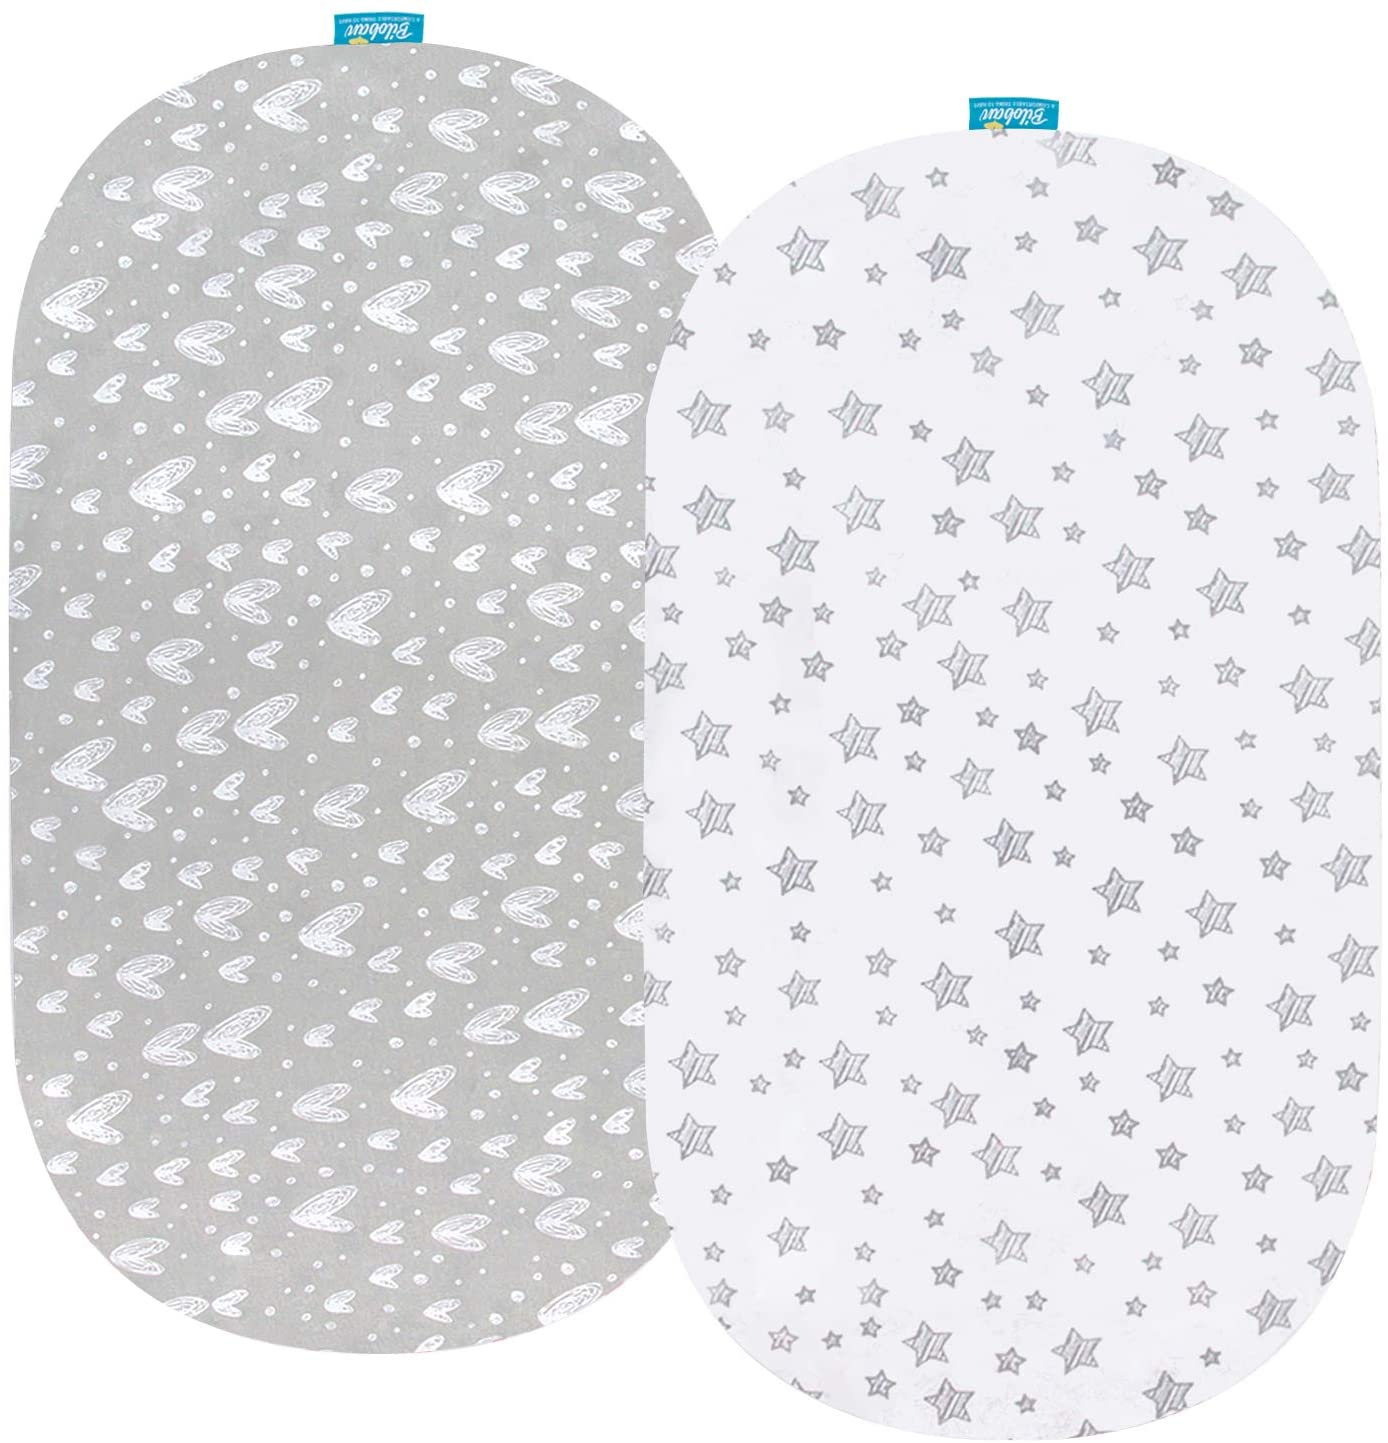 100% Organic Cotton Bassinet Sheets Compatible with Fisher-Price Soothing Motions Bassinet - 2 Pack, White